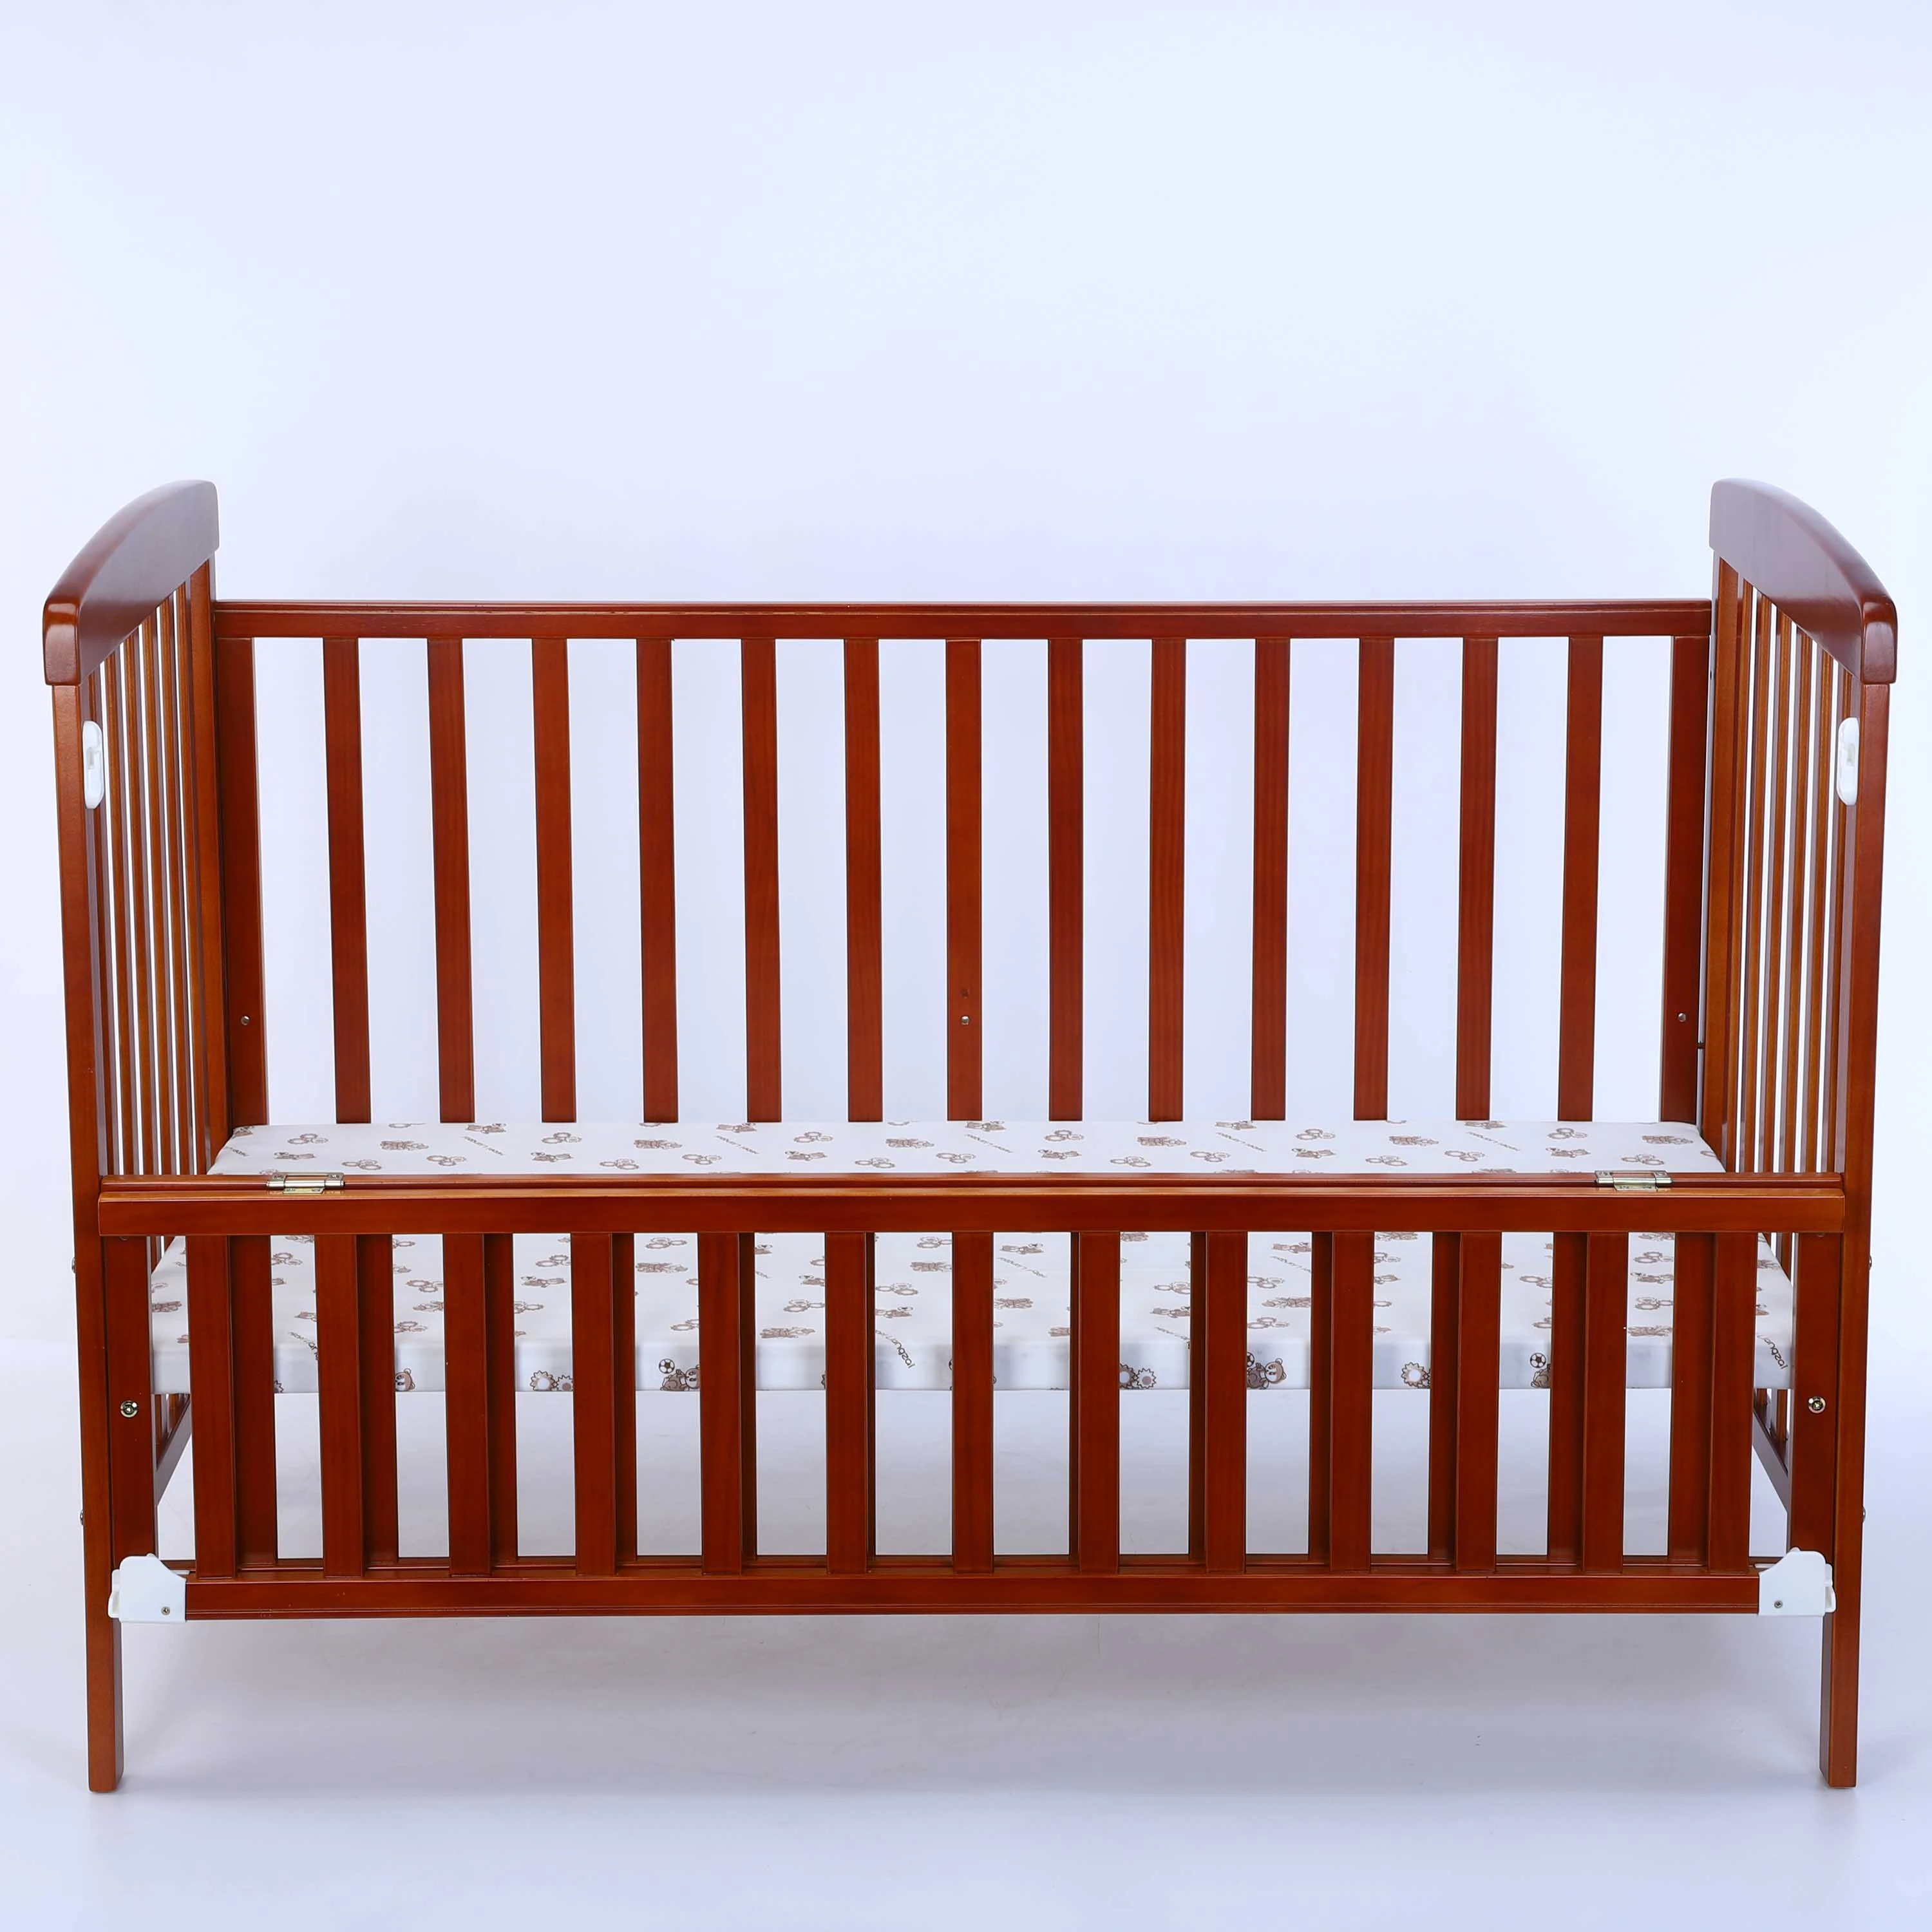 High railing safety crib baby bedding baby wooden bed